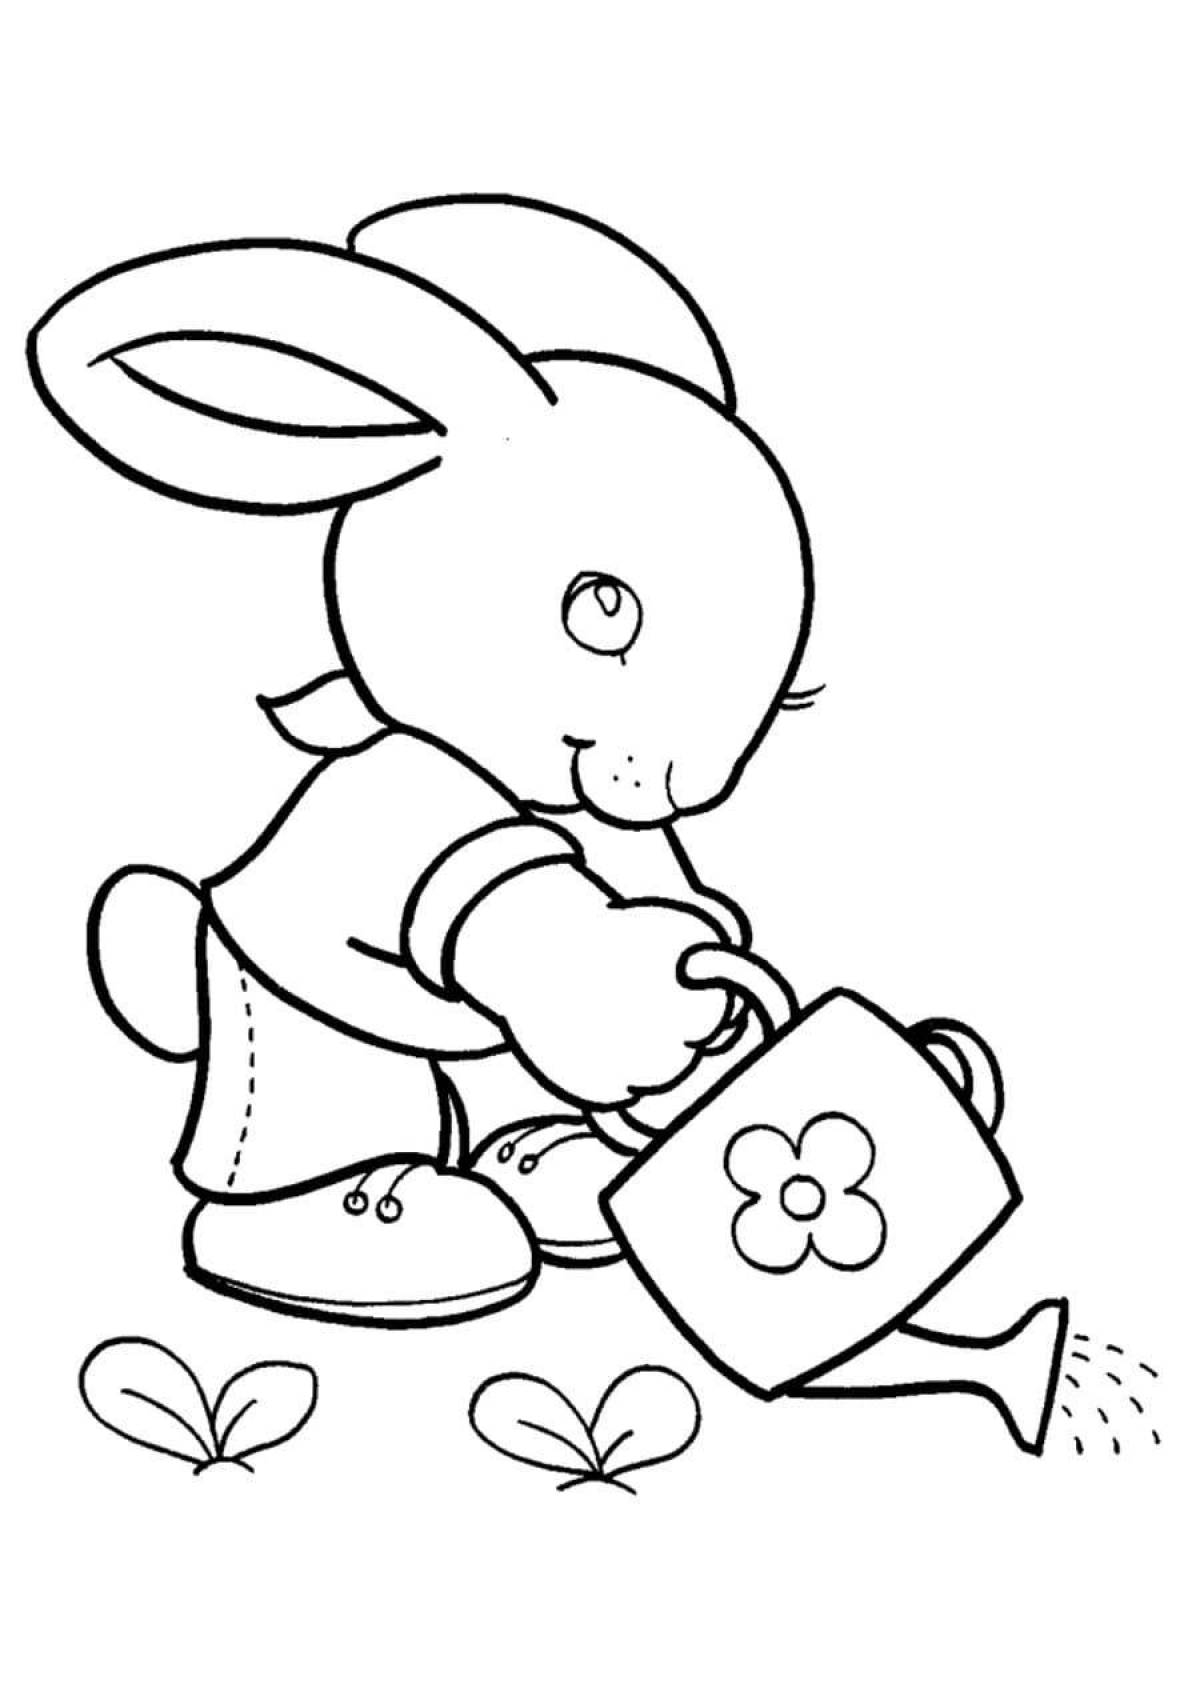 Wiggly coloring page bunny for kids